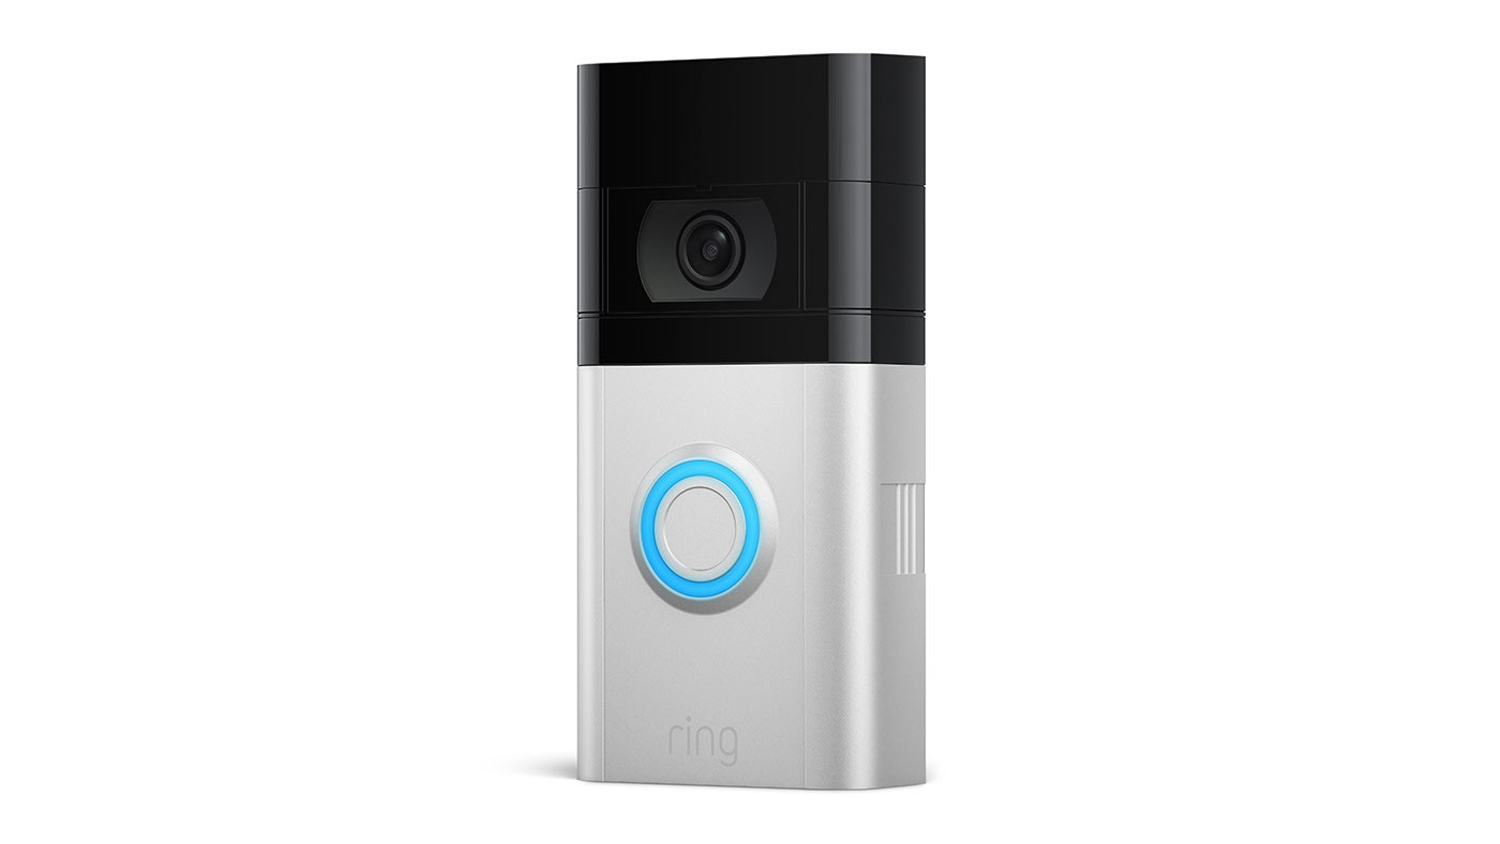 Buying a wired video doorbell? Make sure you have the right transformer. |  Android Central